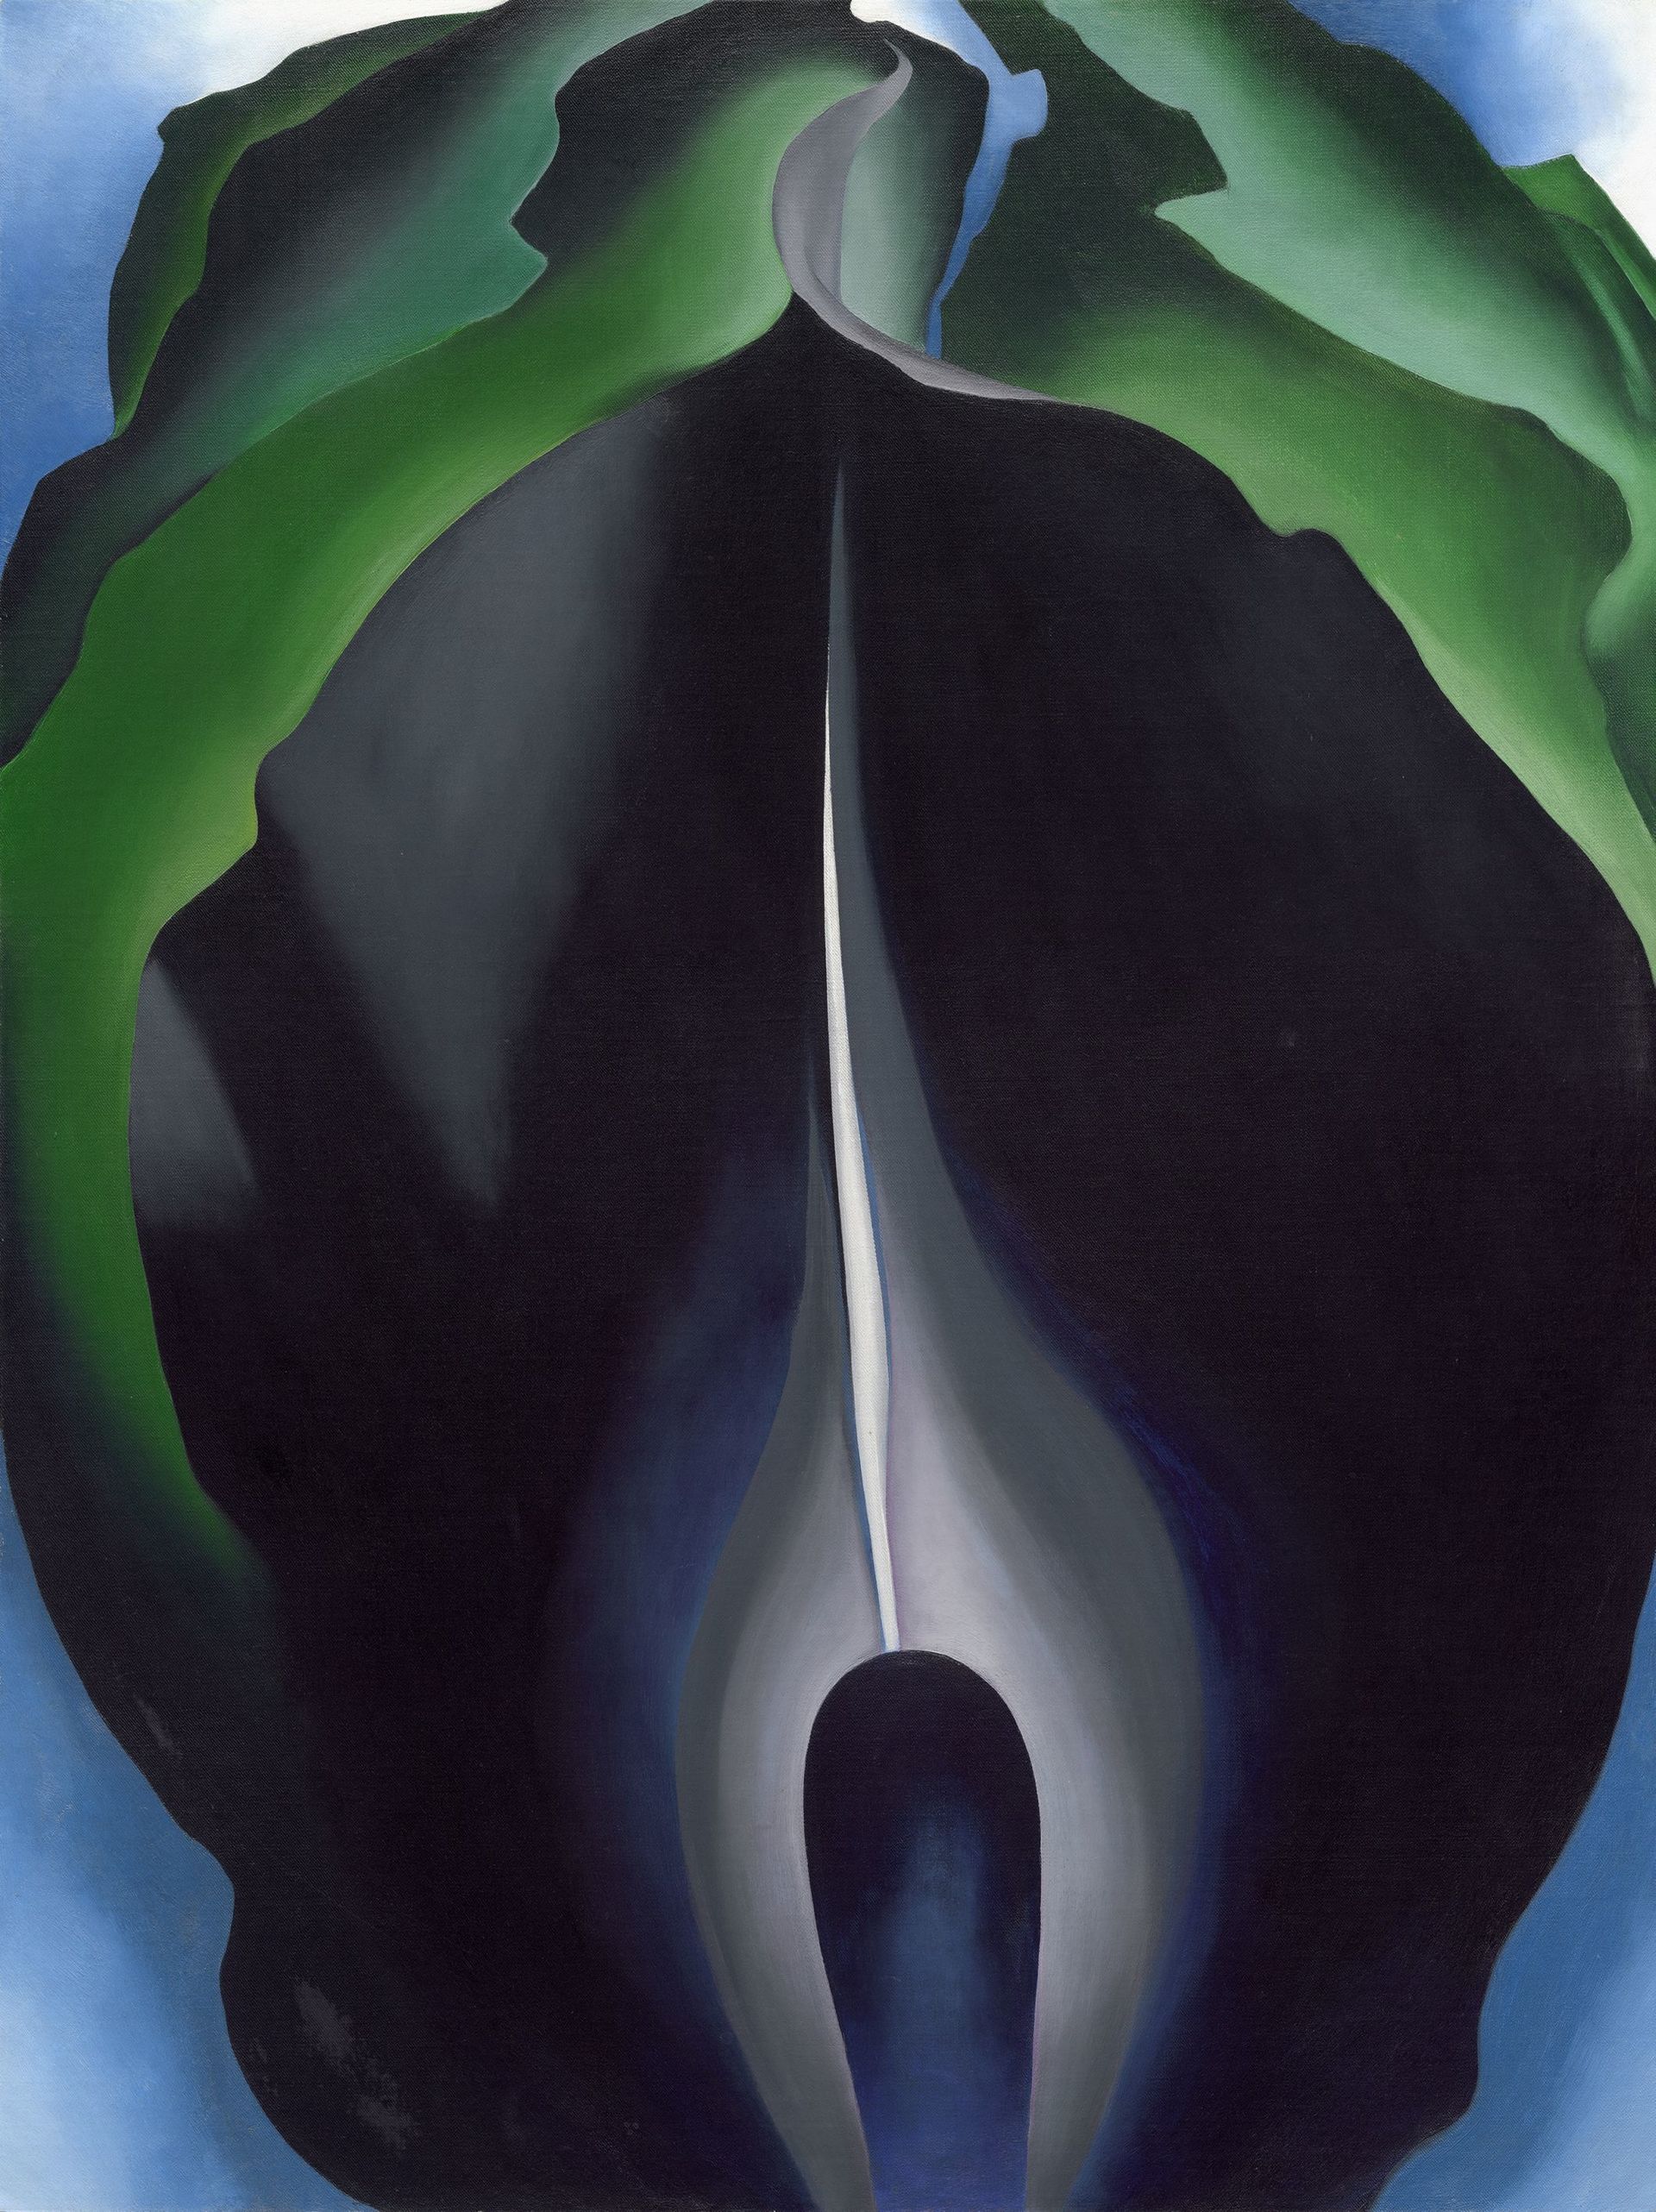 02. O'Keeffe_Jack-in-the-Pulpit No IVA.jpg